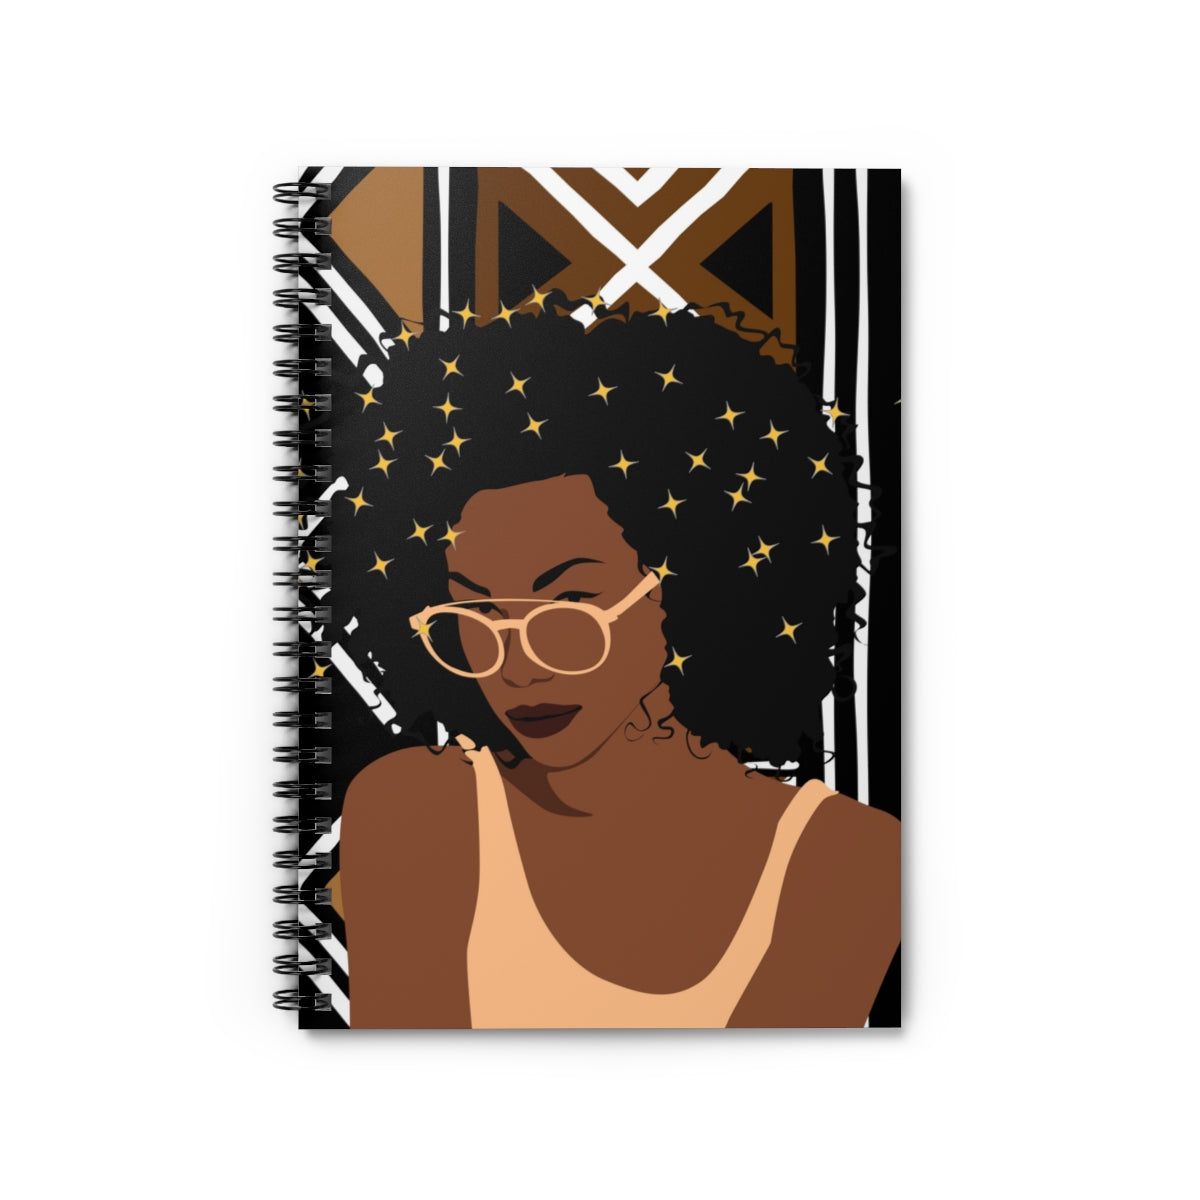 Black woman Diary Sparkly Afro Blogger Spiral Notebook